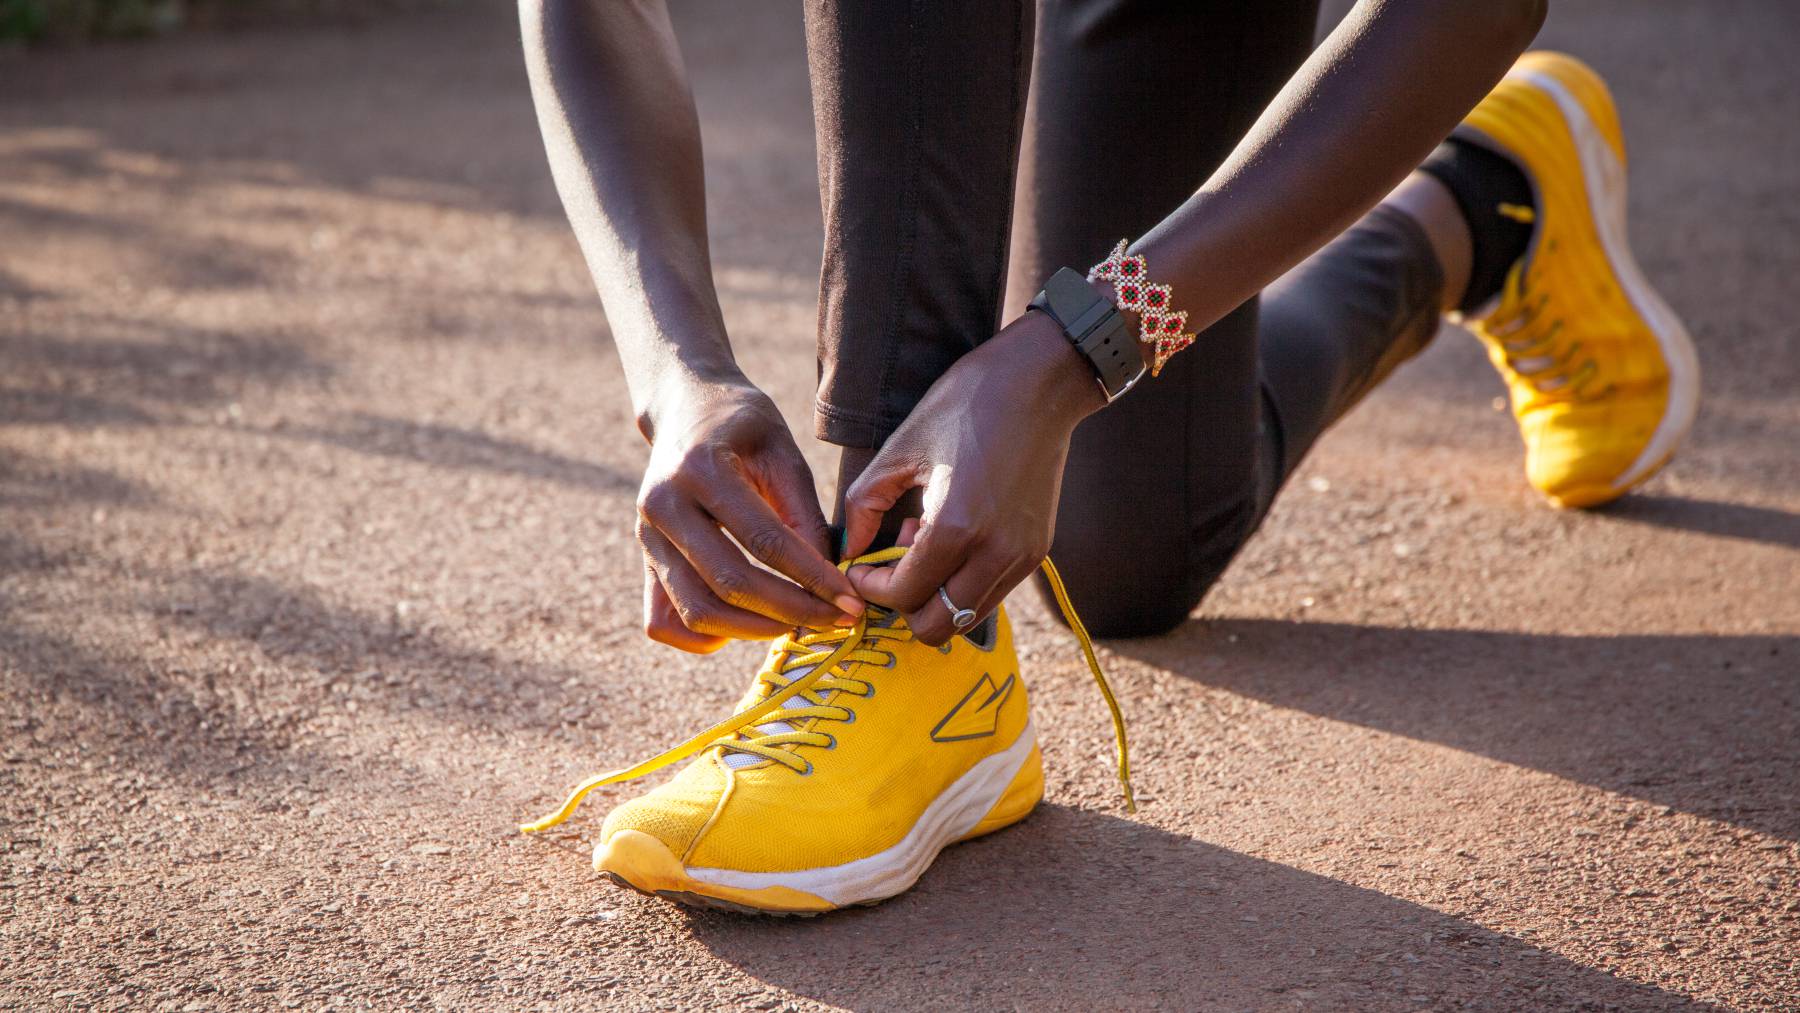 Kenyan performance running label Enda has become a leader in the 'made in Africa' footwear market.